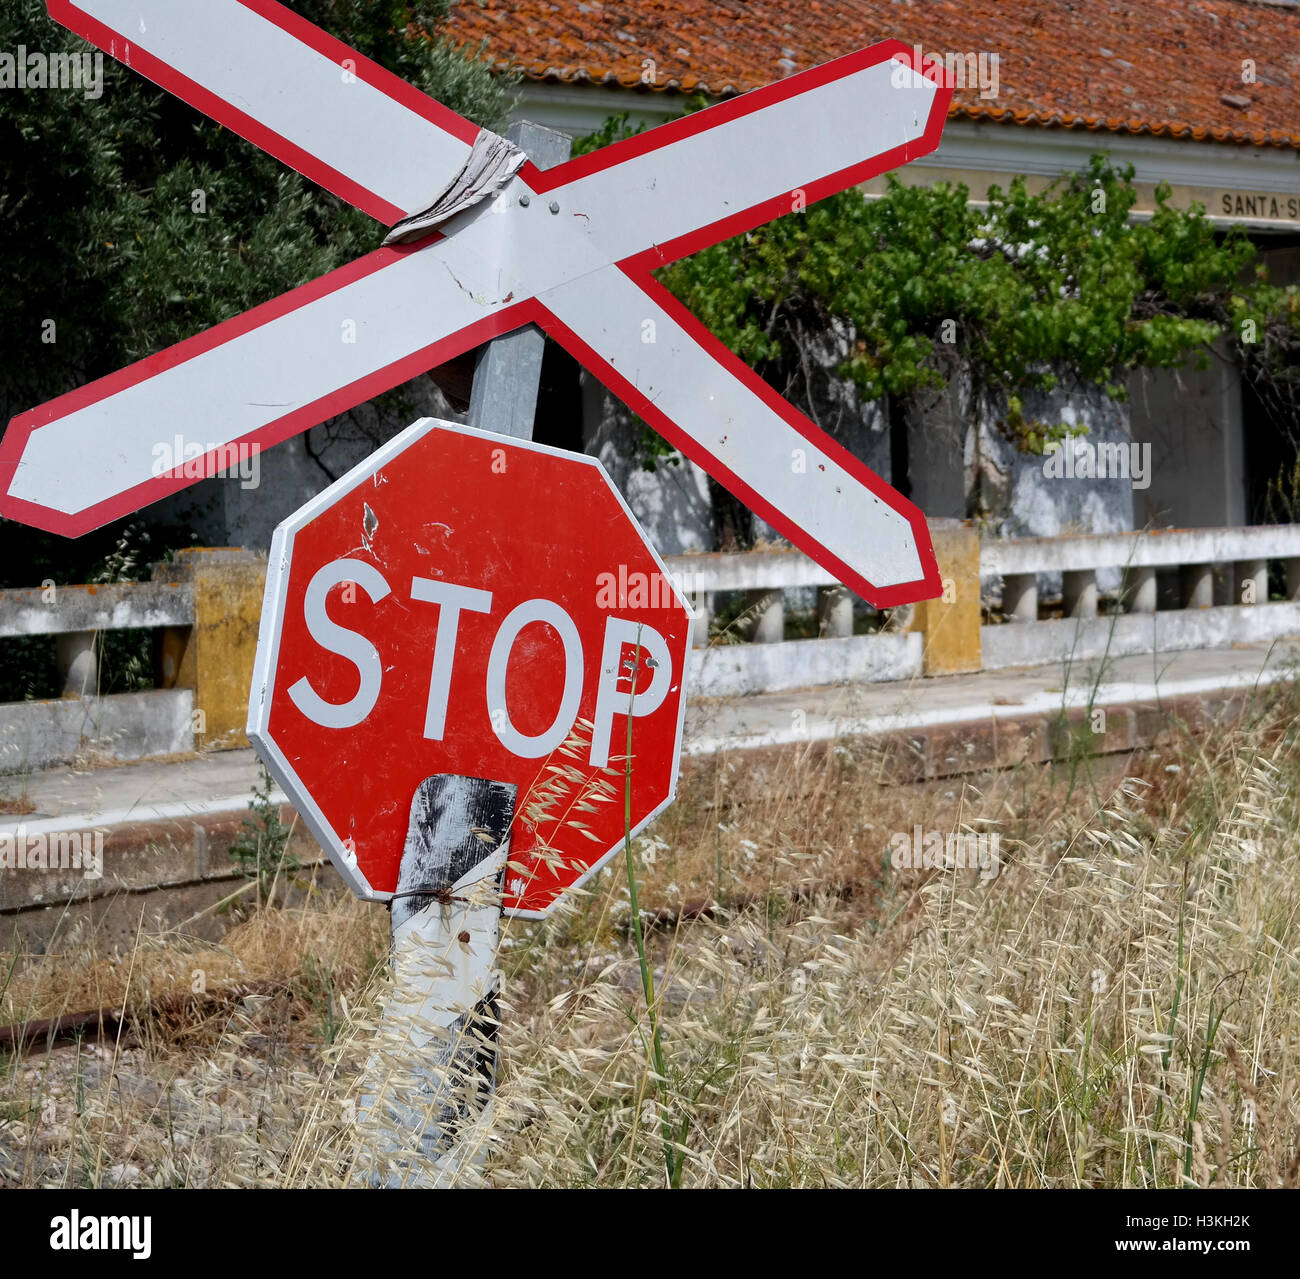 Stop sign in Portugal Stock Photo